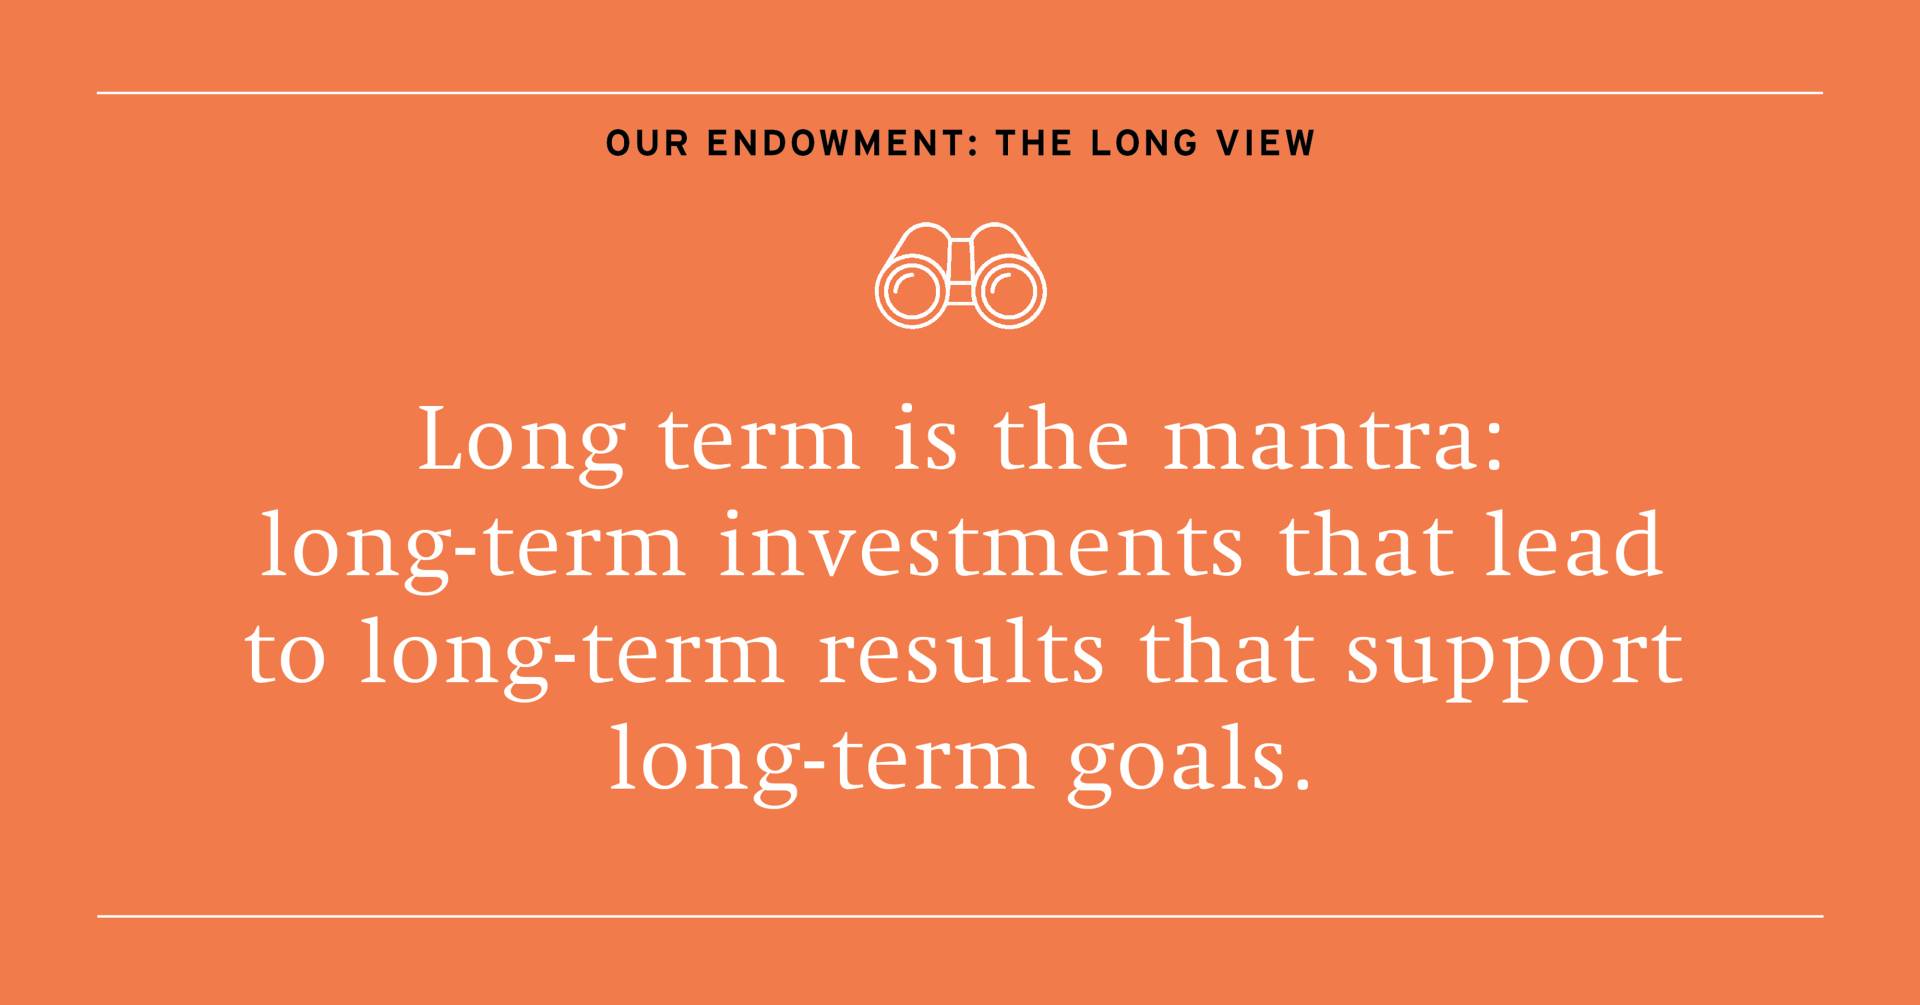 Long term is the mantra: long term investments that lead to long term results that support long-term goals